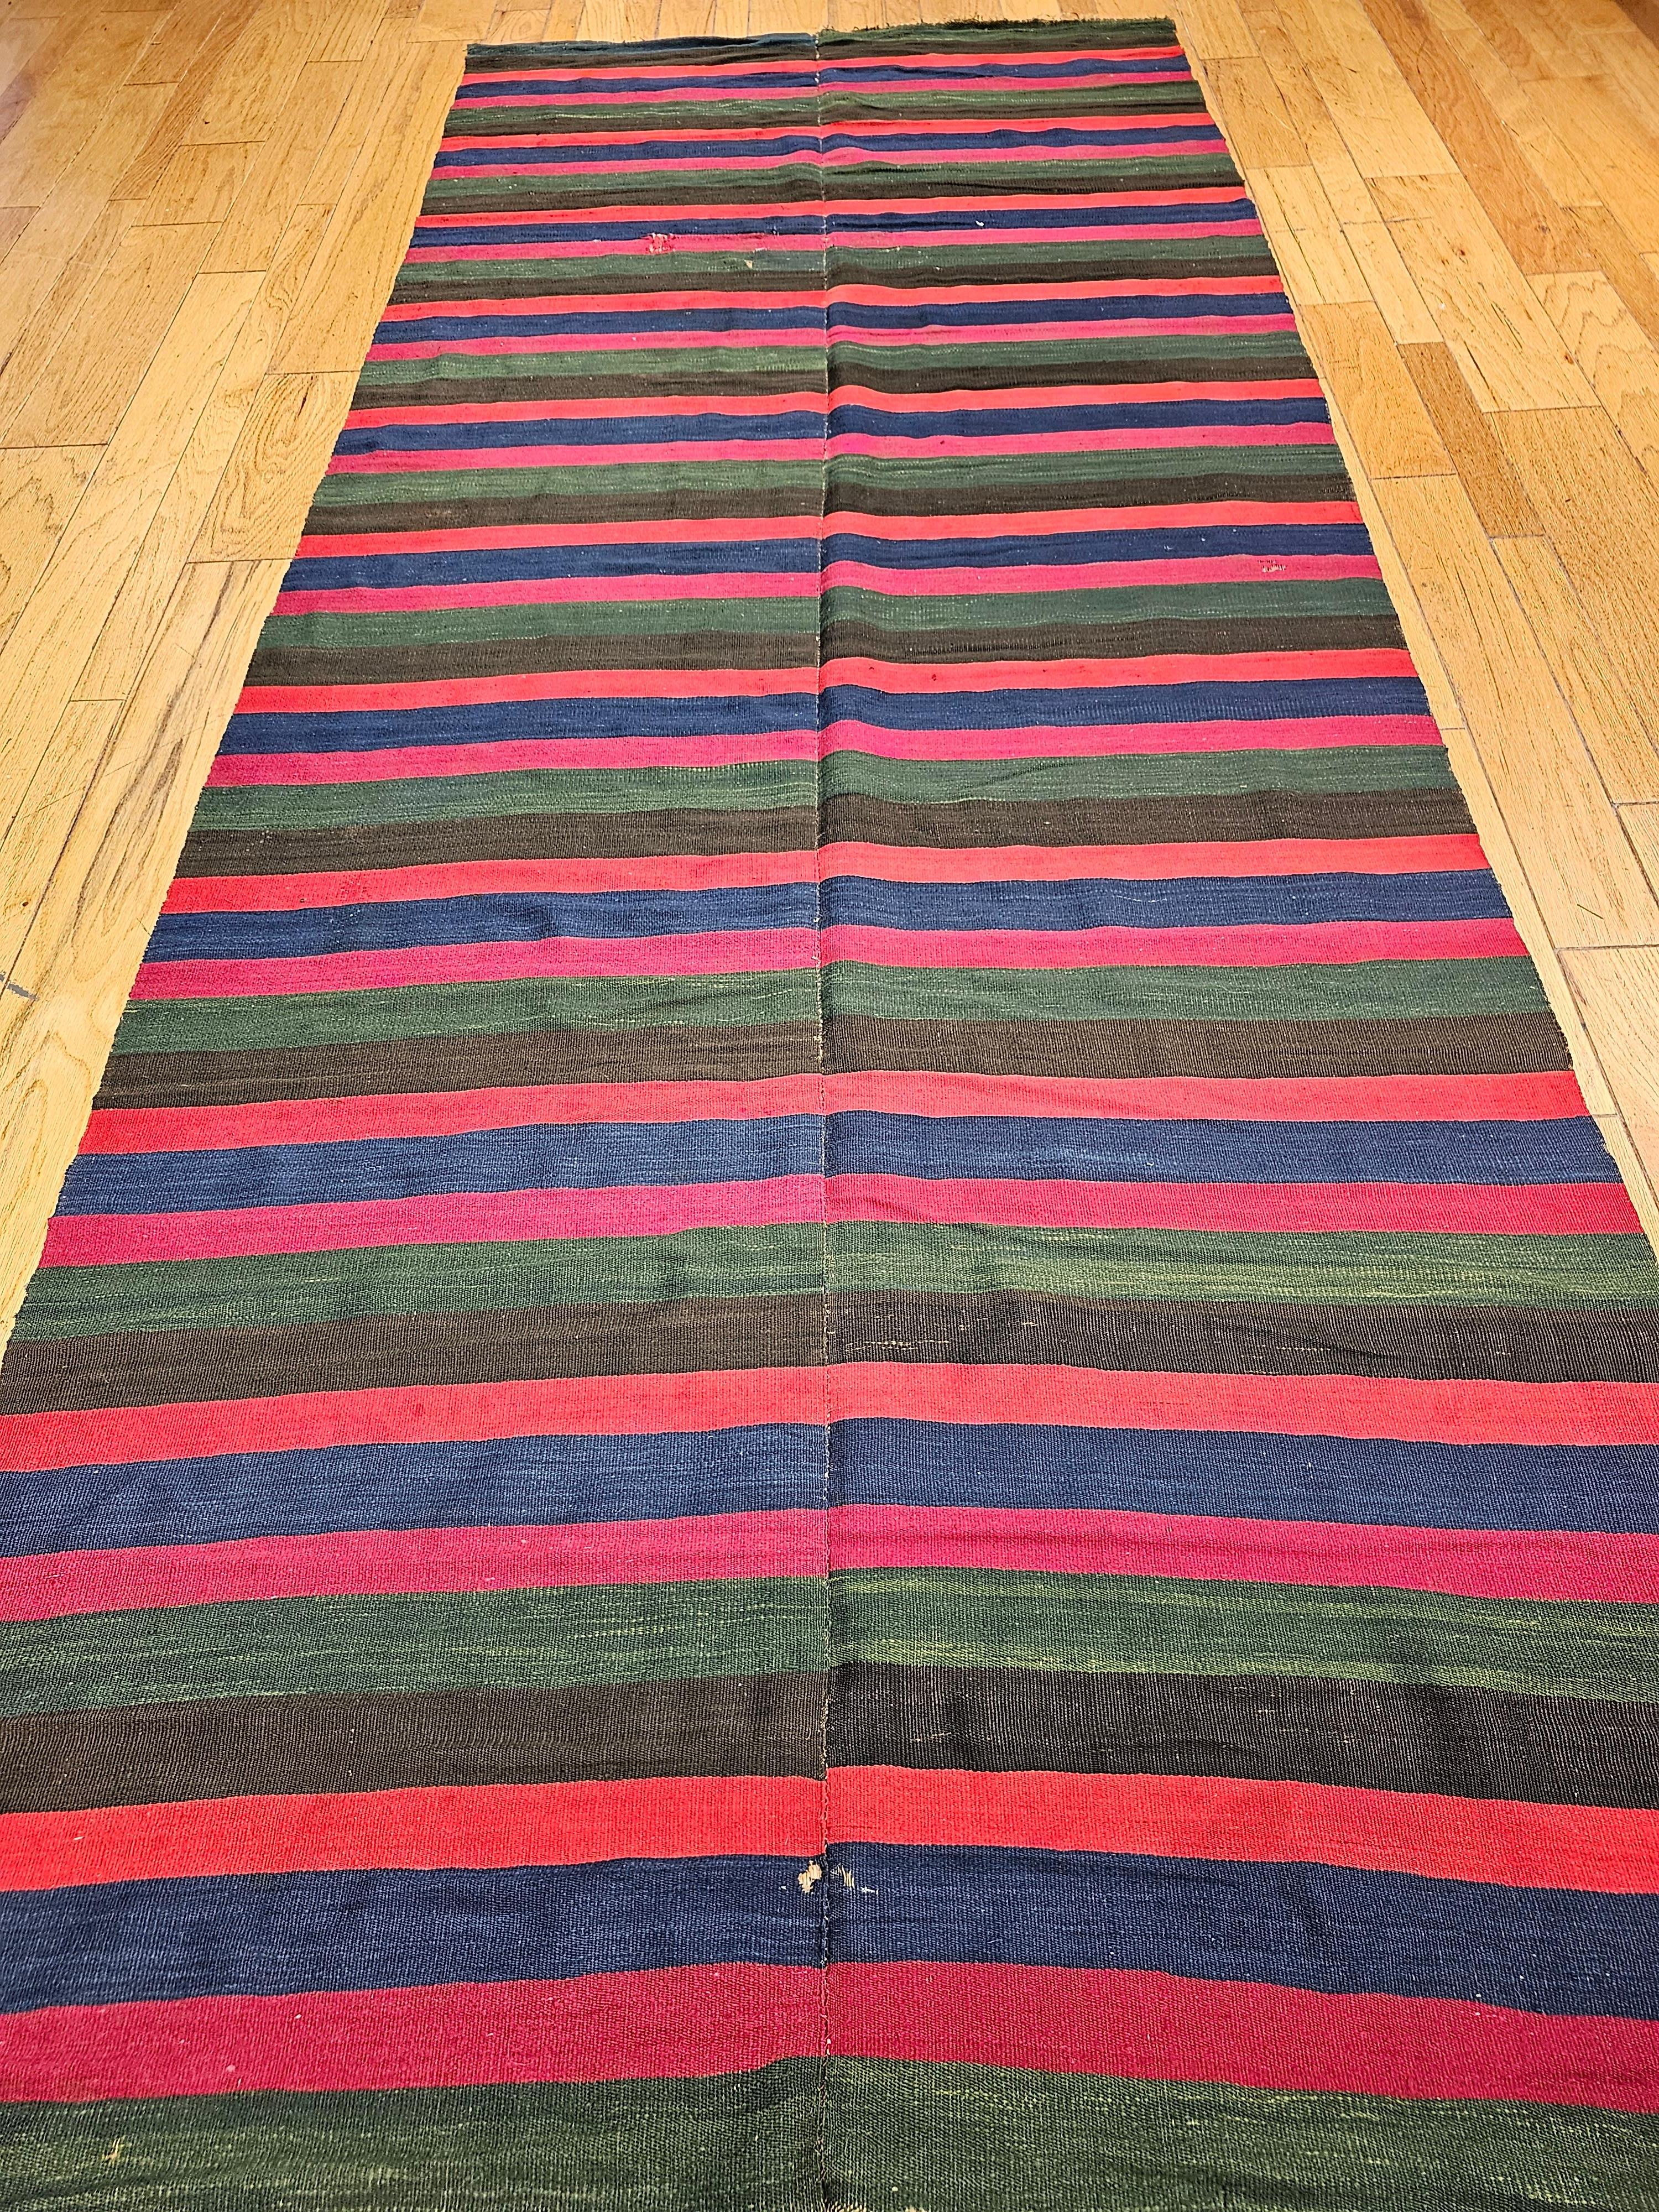 Beautiful vintage oversized South American kilim in a banded stripes design with brilliant stripes in colors of Blue, red, green, black, orange and magenta. The kilim has an extremely fine weave and a very high quality handspun wool that was hand